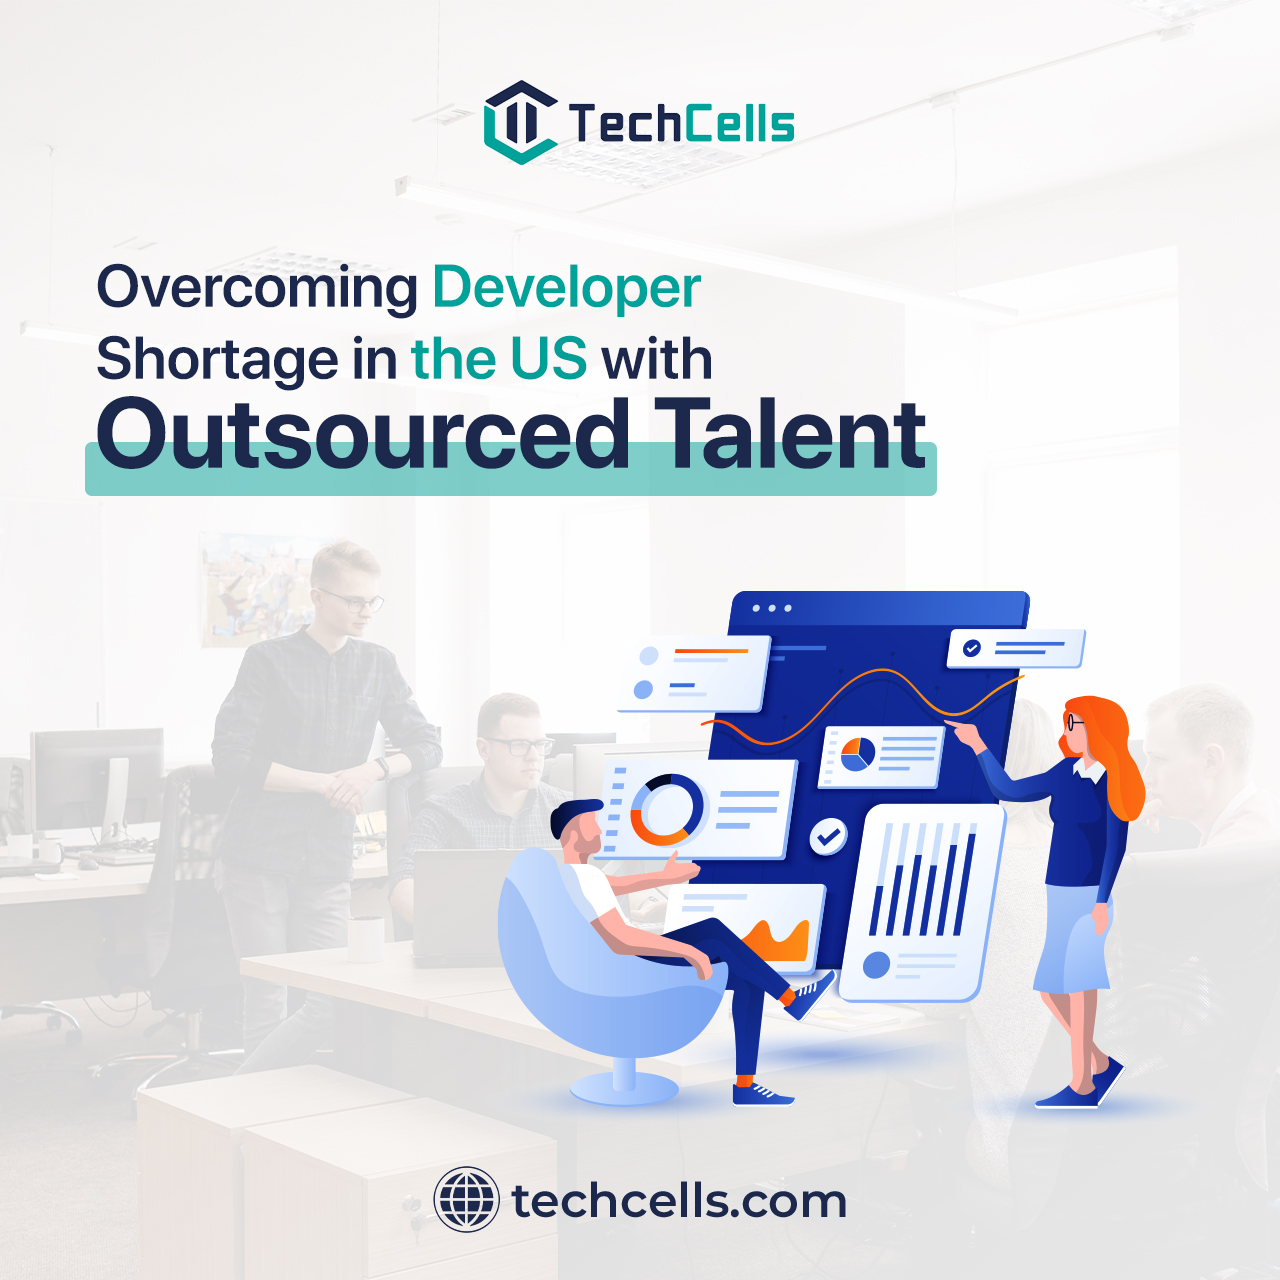 Overcoming Developer Shortage in the US with Outsourced Talent